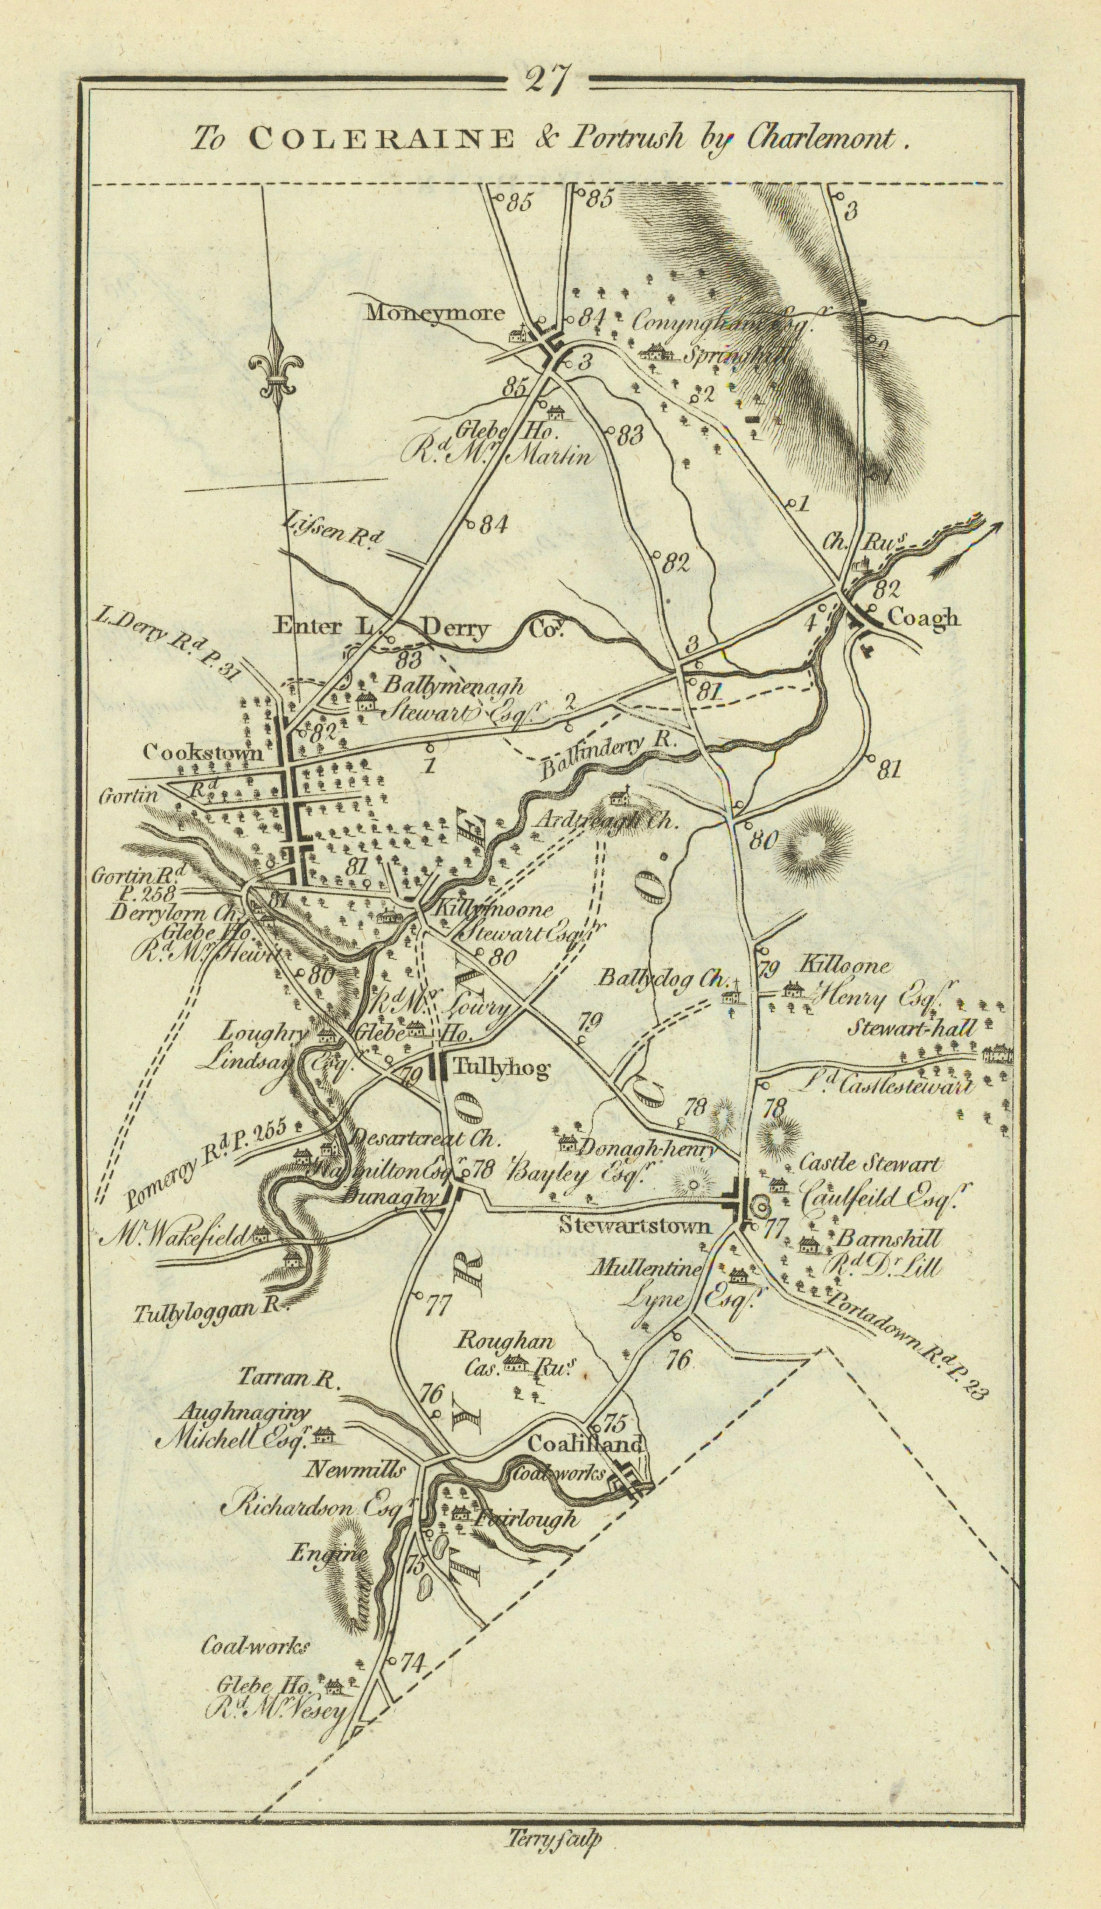 #27 Coleraine & Portrush by Charlemont. Coagh Cookstown. TAYLOR/SKINNER 1778 map